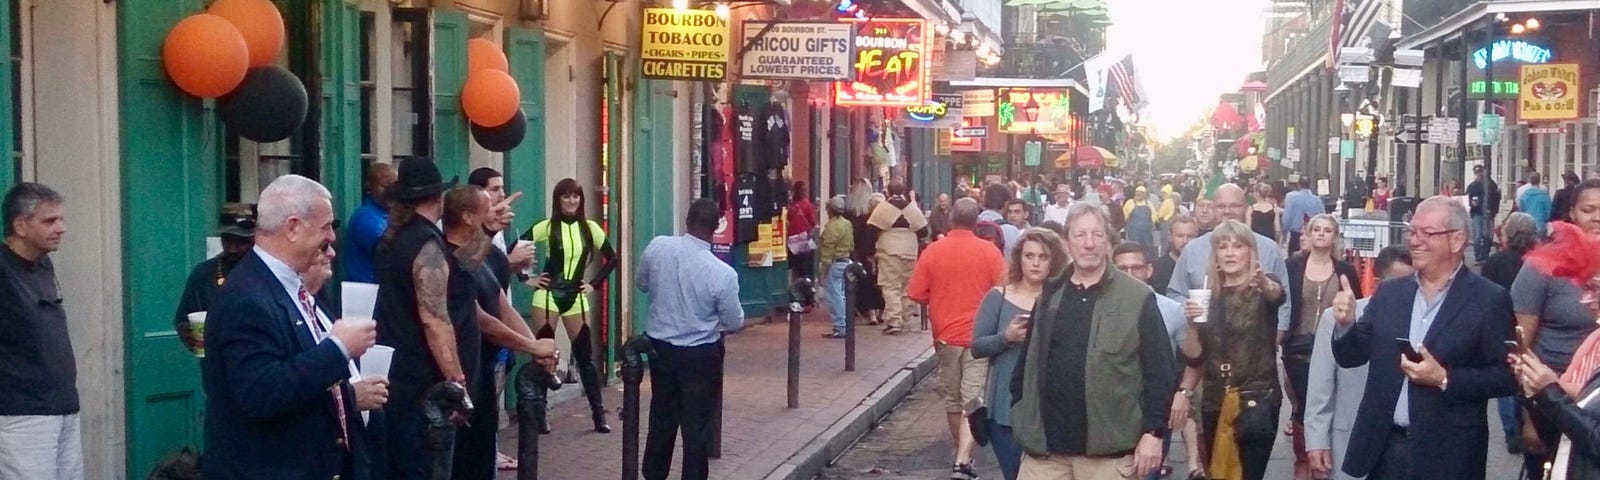 Early evening crowd on Halloween on Bourbon St, New Orleans